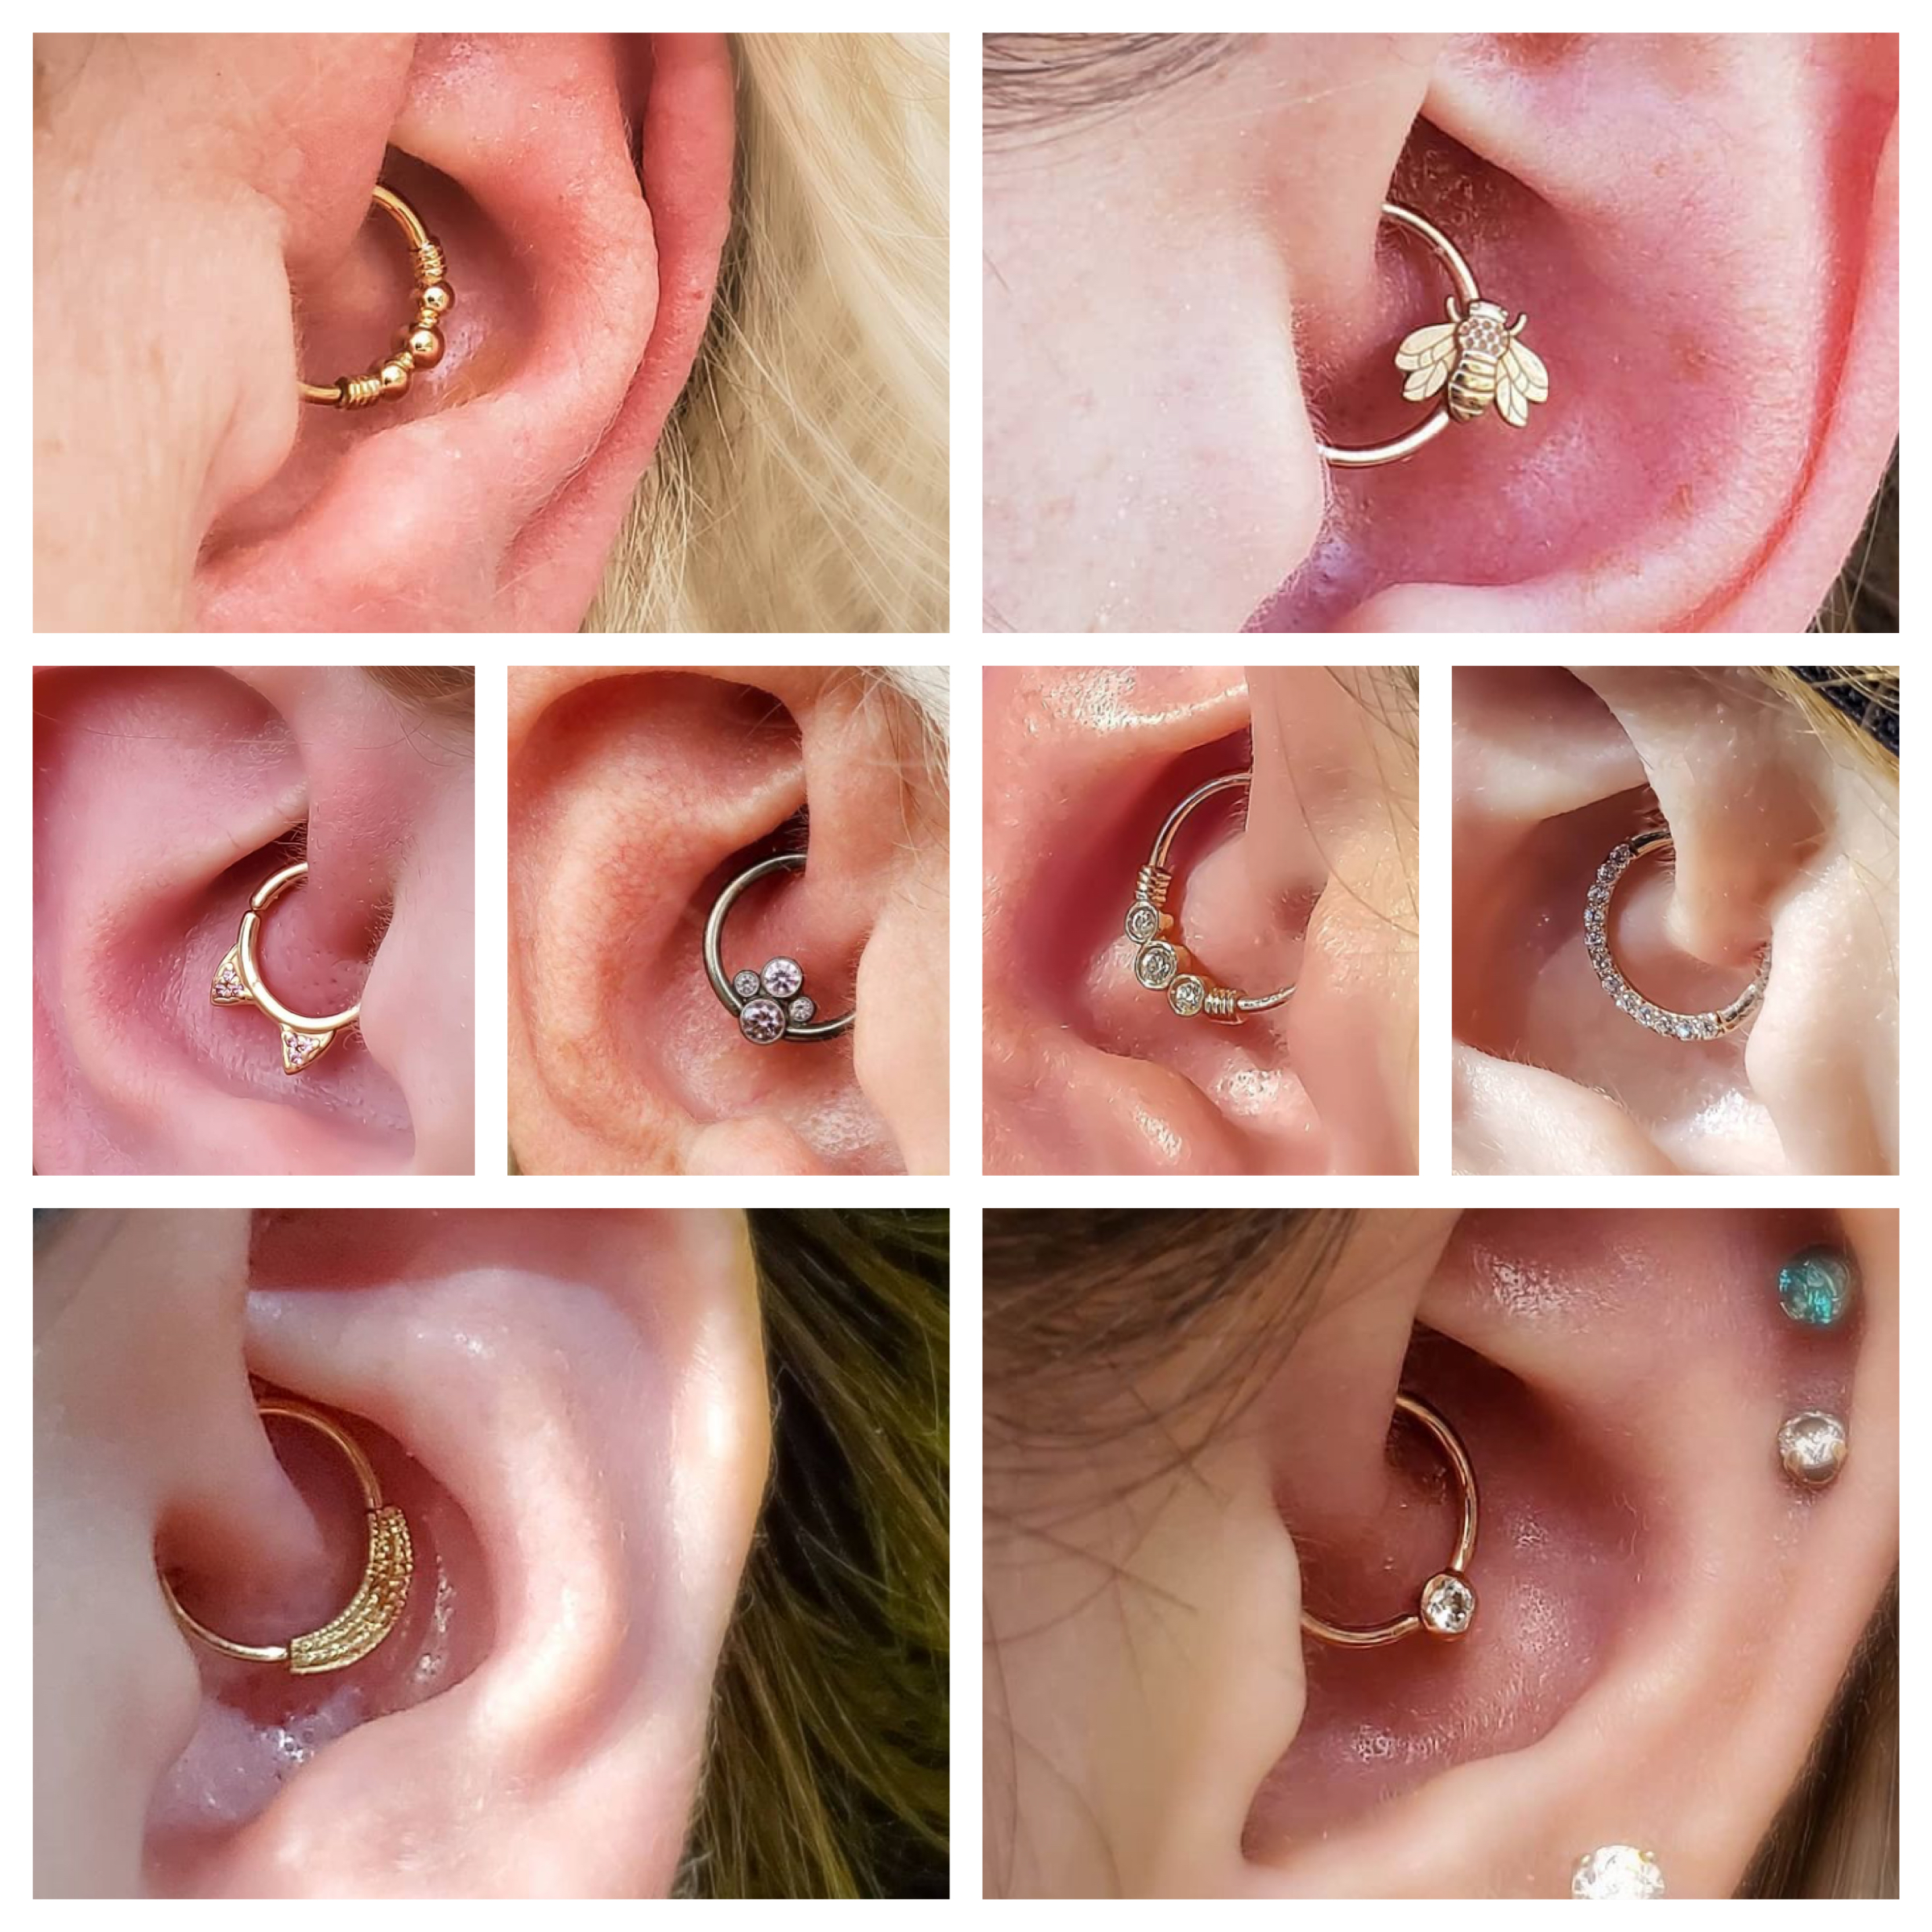 Detail Ear Piercing Knoxville Nomer 35